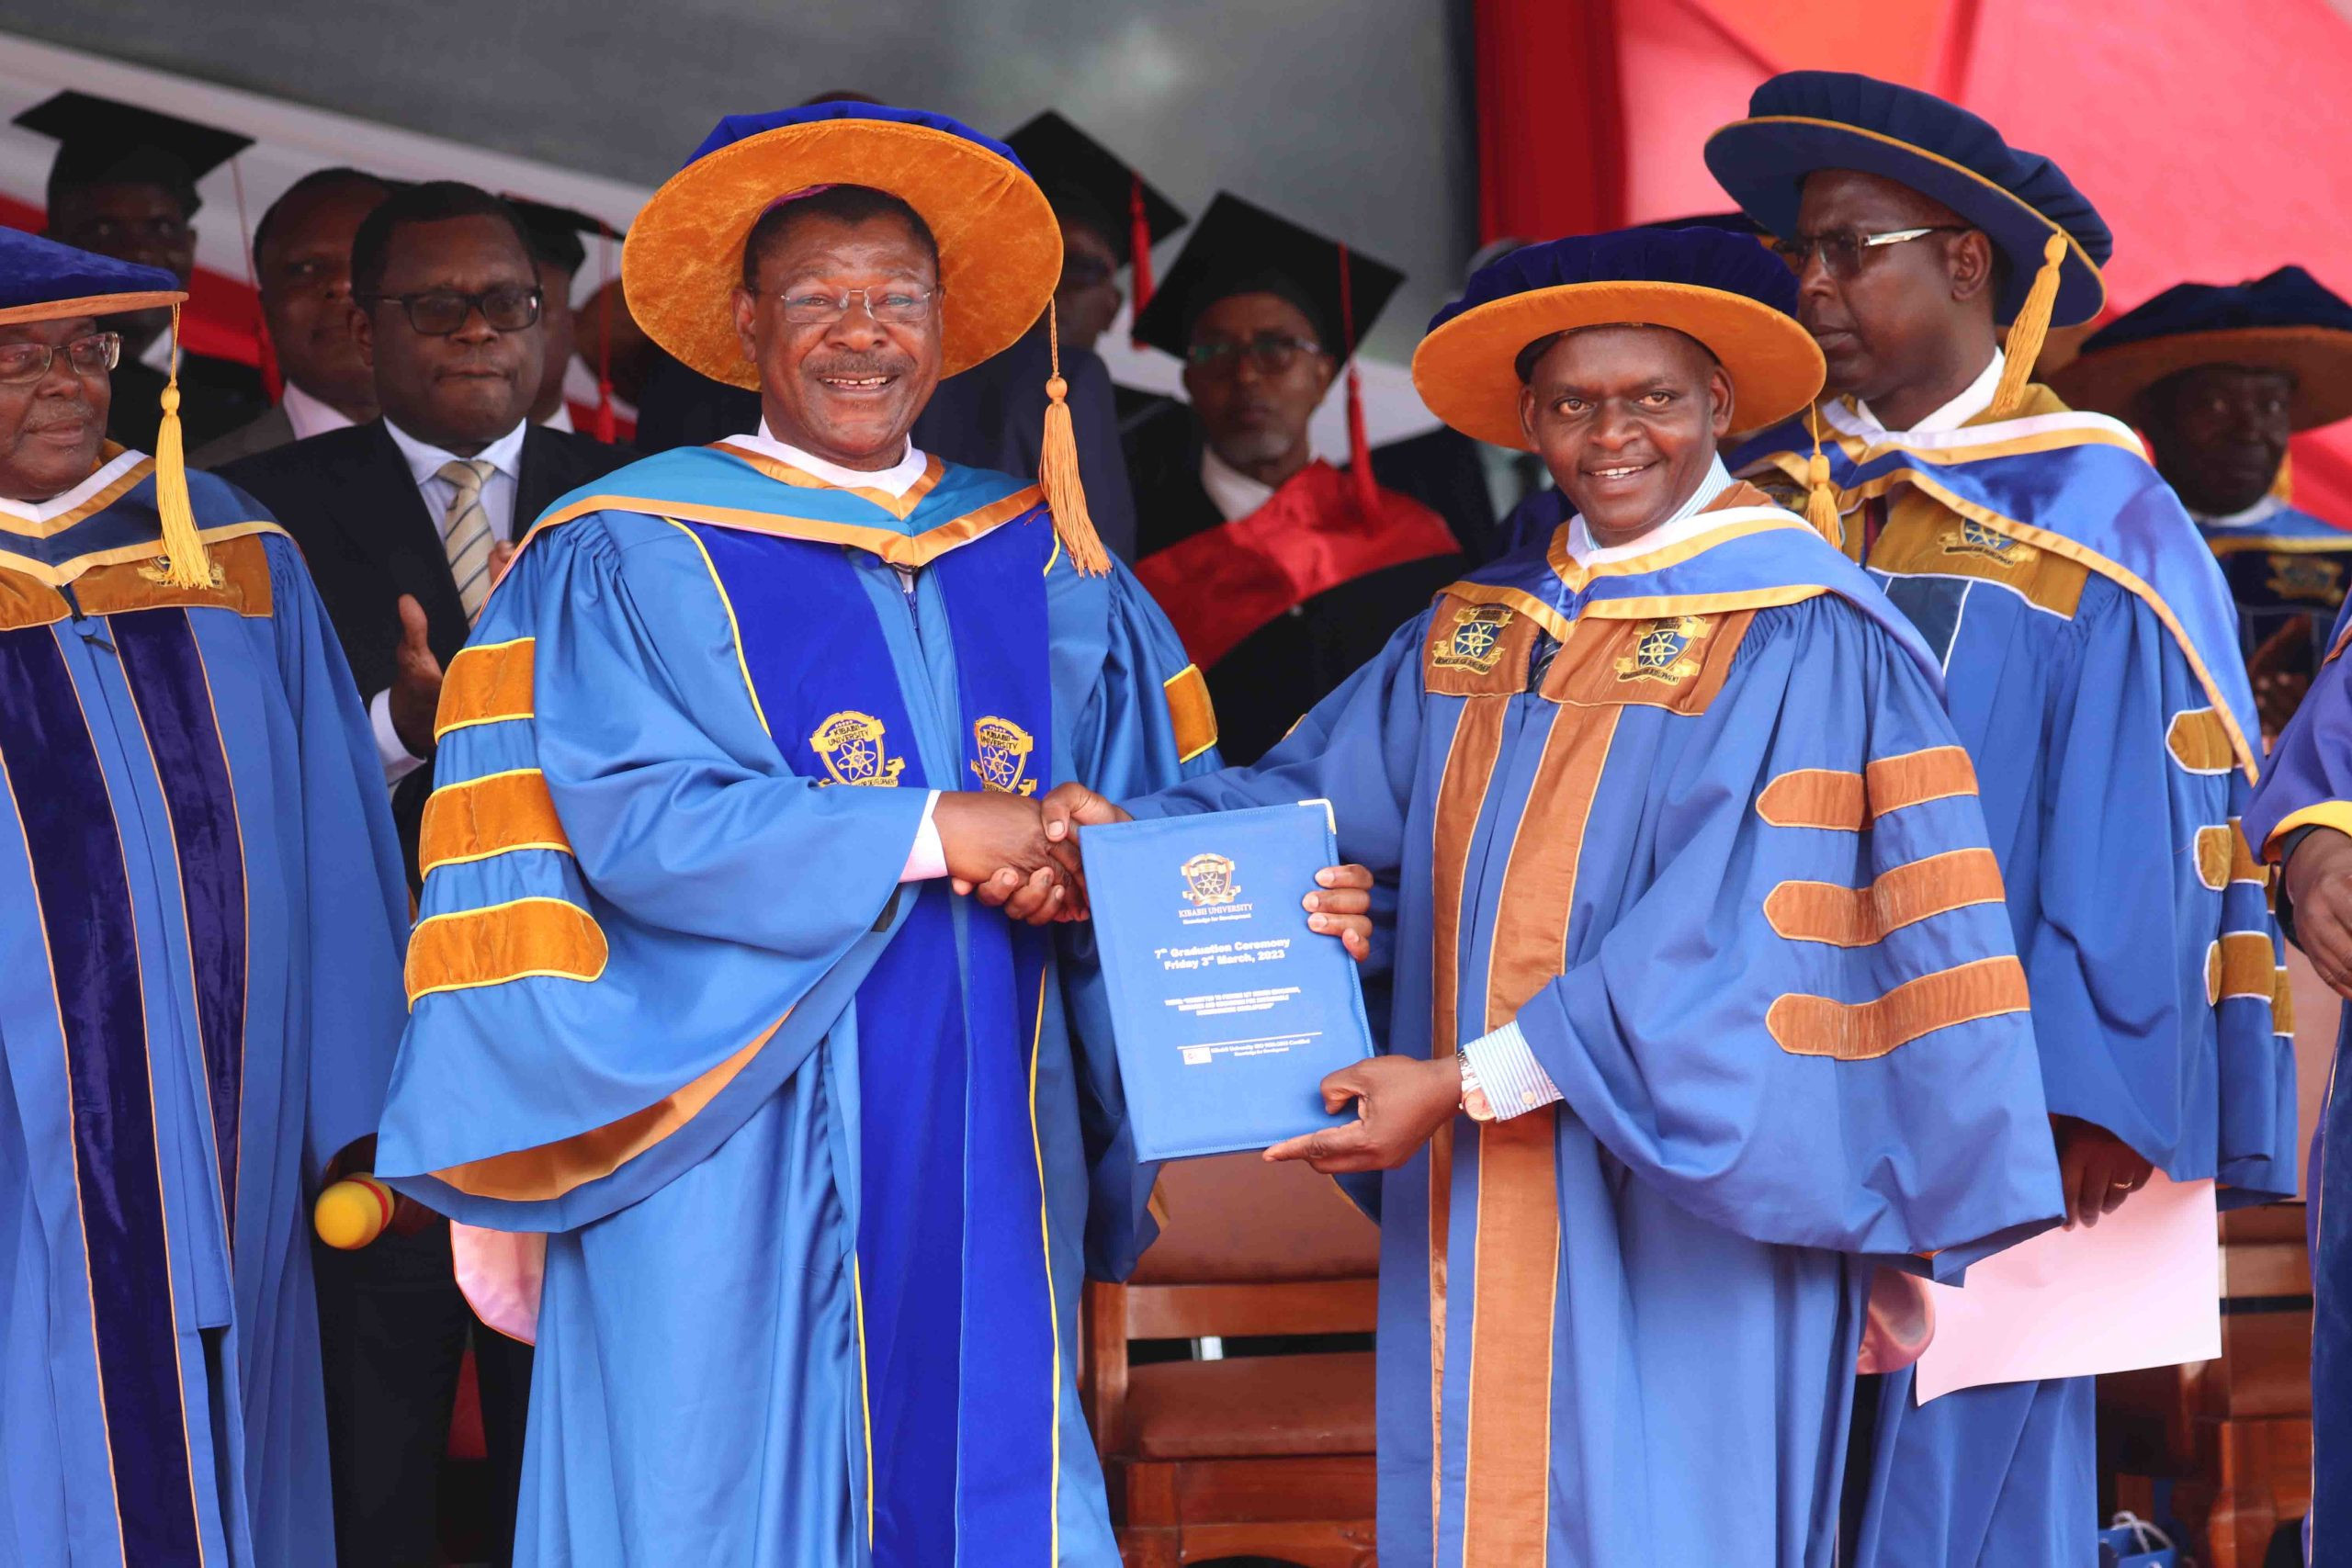 TWO-HONORARY-DEGREES-AND-HONOURABLE-DELEGATIONS-DECORATED-THE-7TH-GRADUATION4